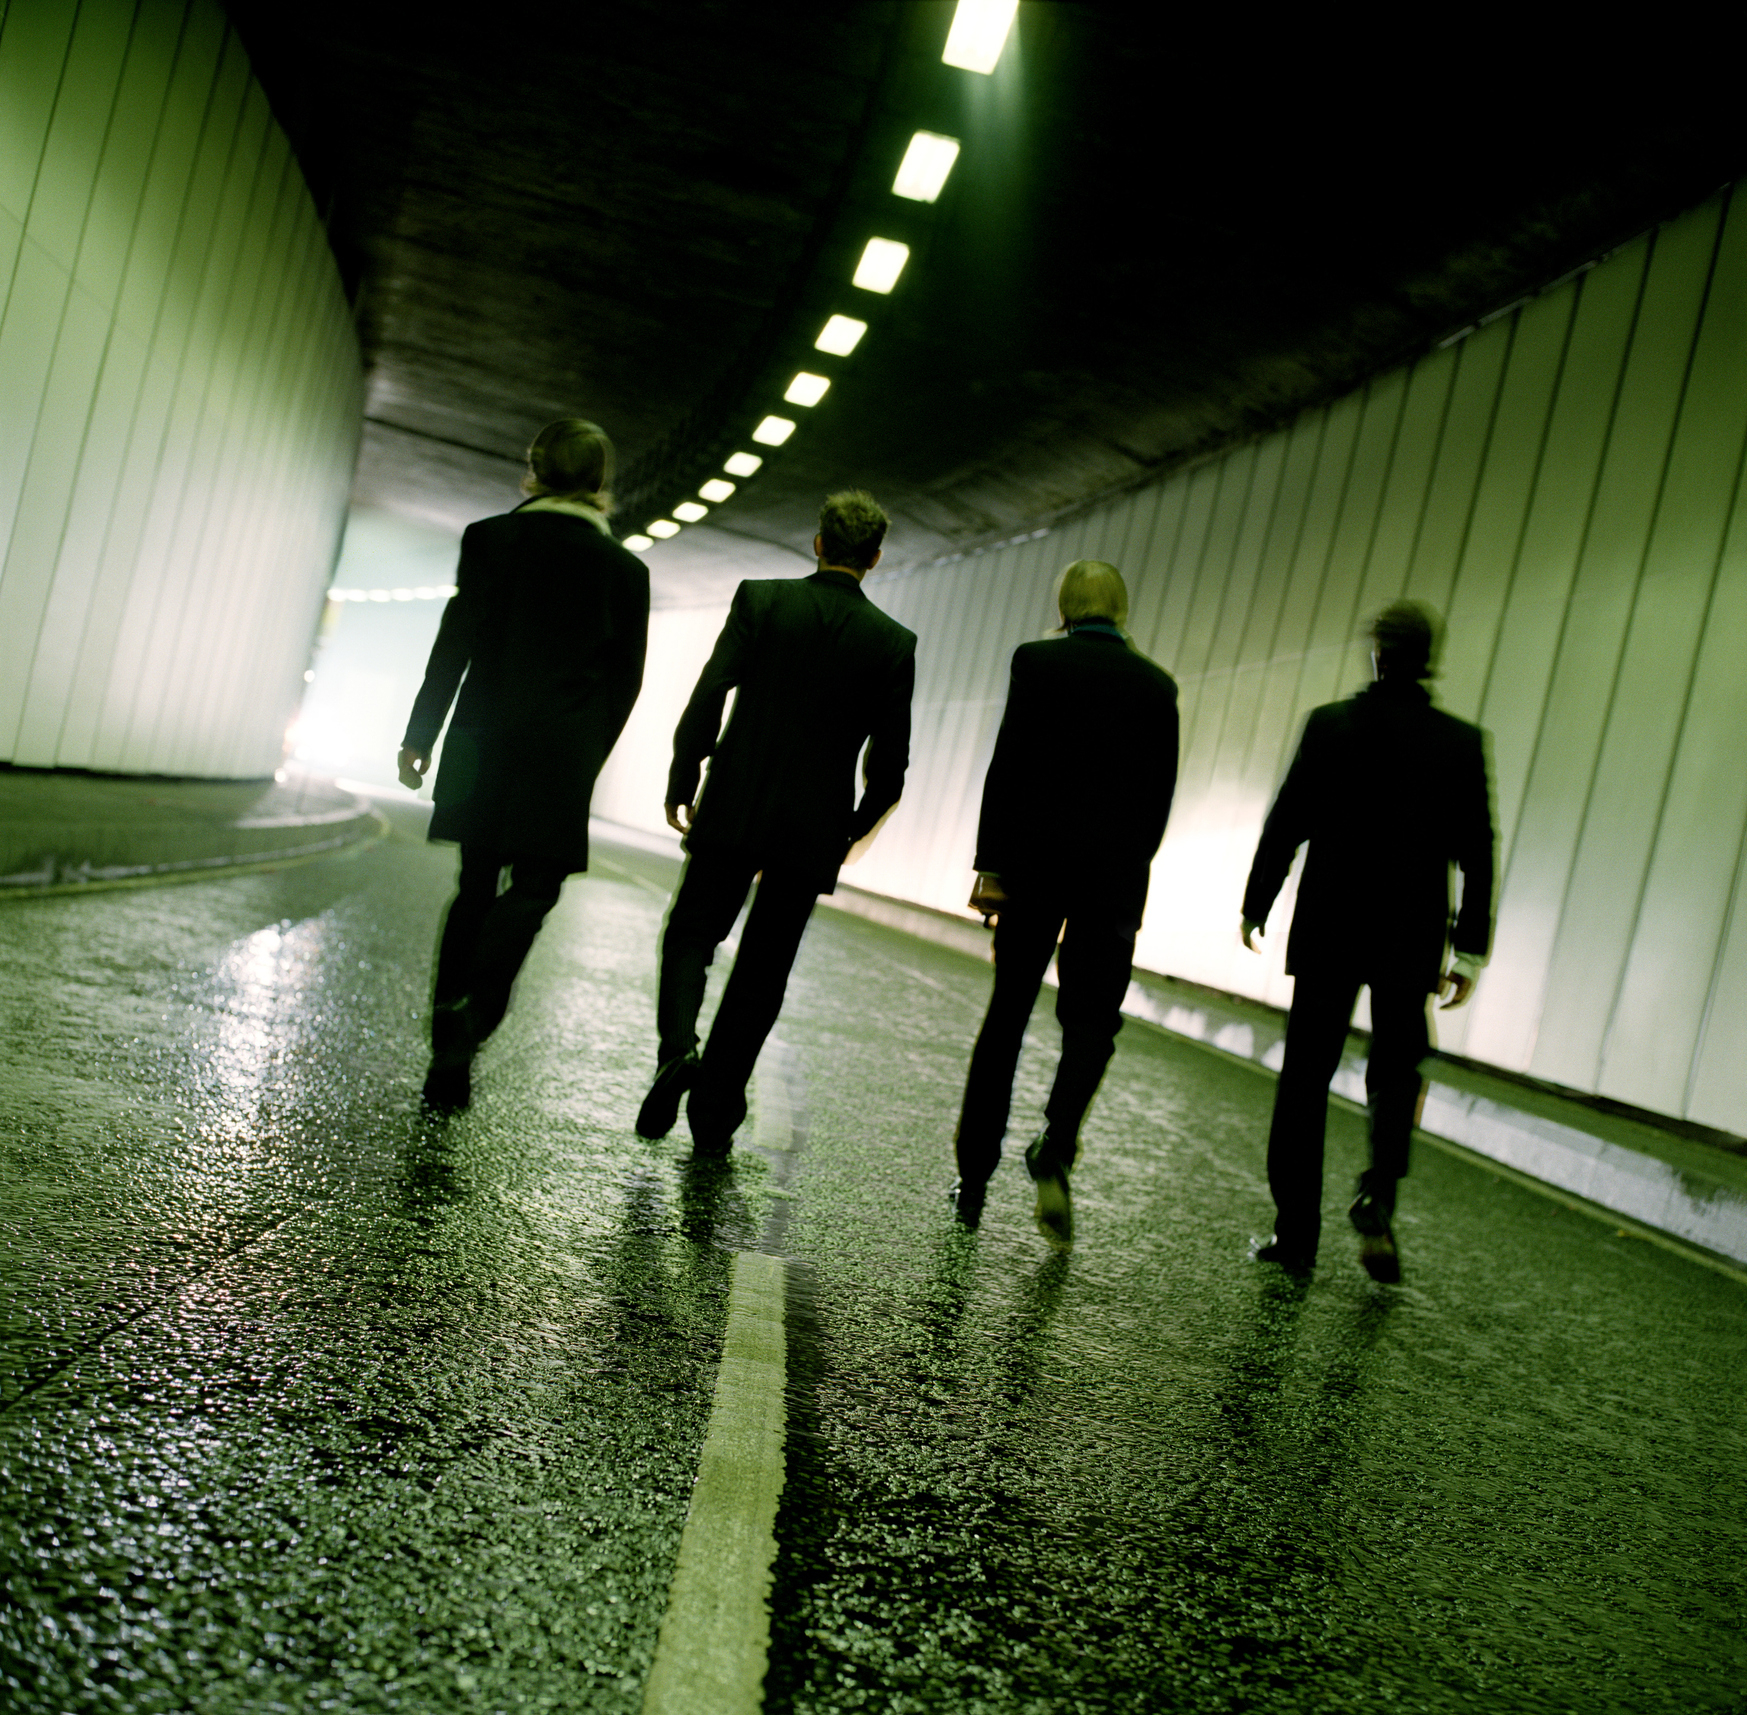 Four individuals walking away in a tunnel, possibly representing a metaphor for parental guidance or protection